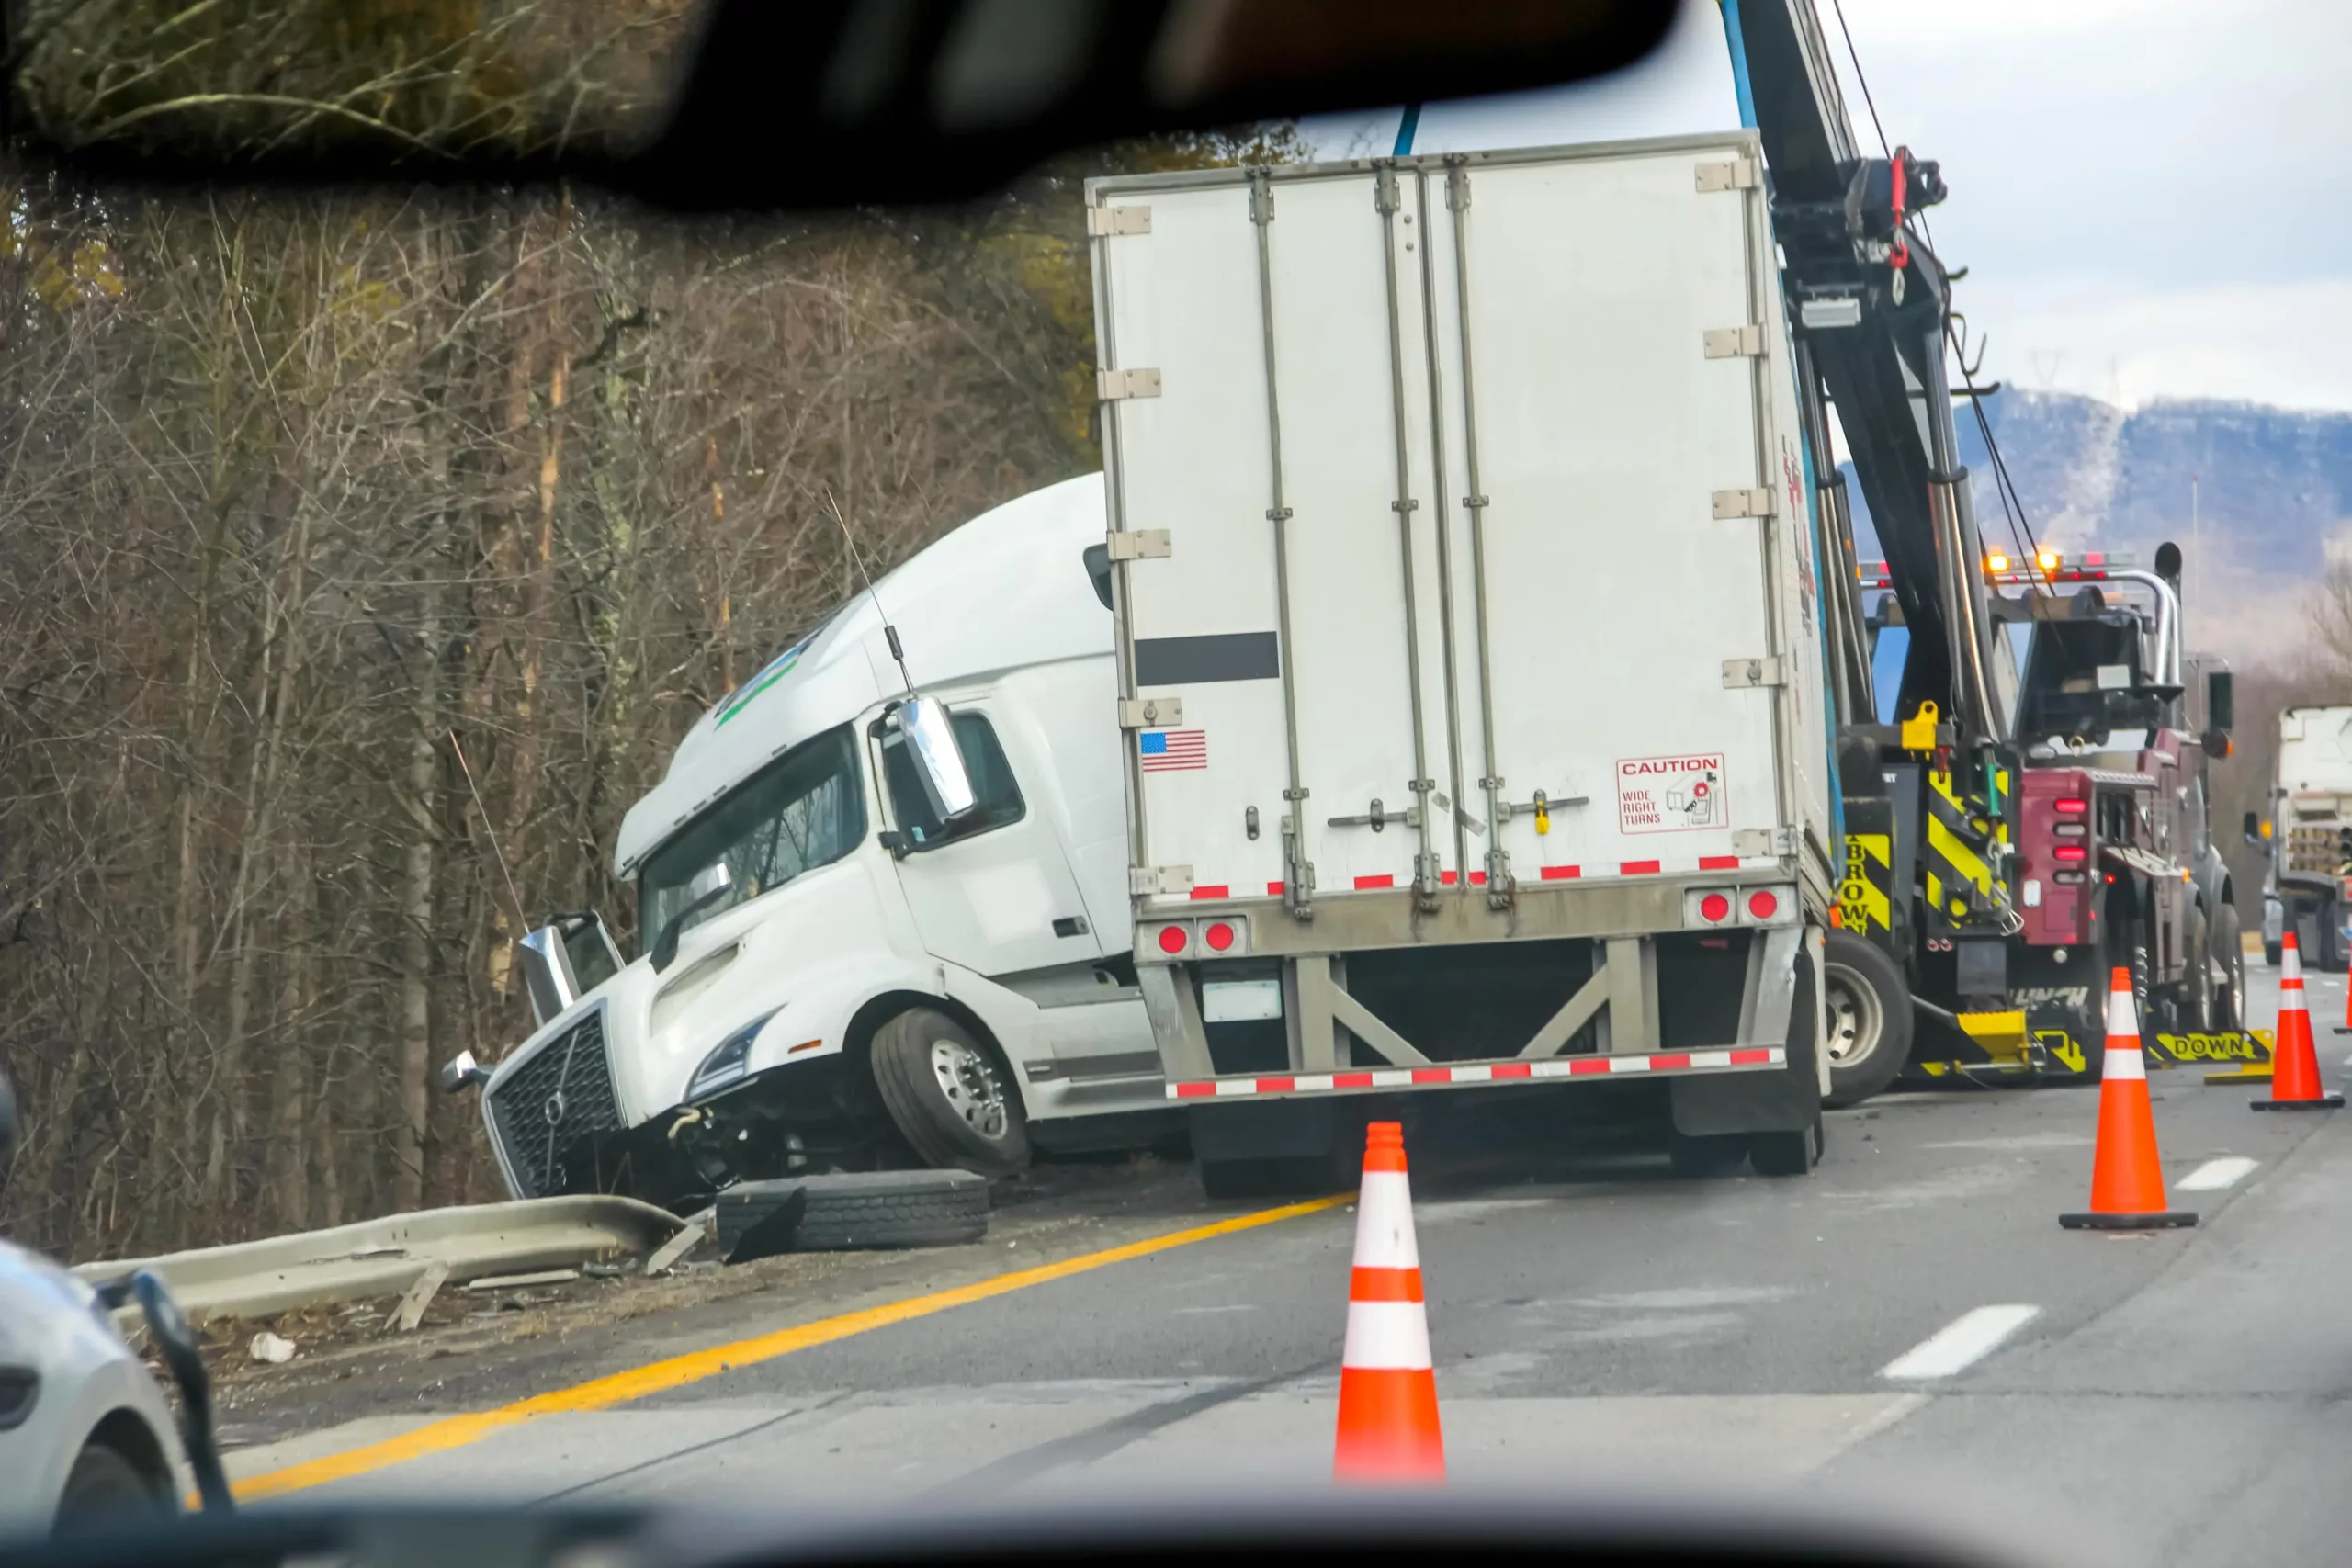 Ensuring you get what the claim is worht after a truck accident.